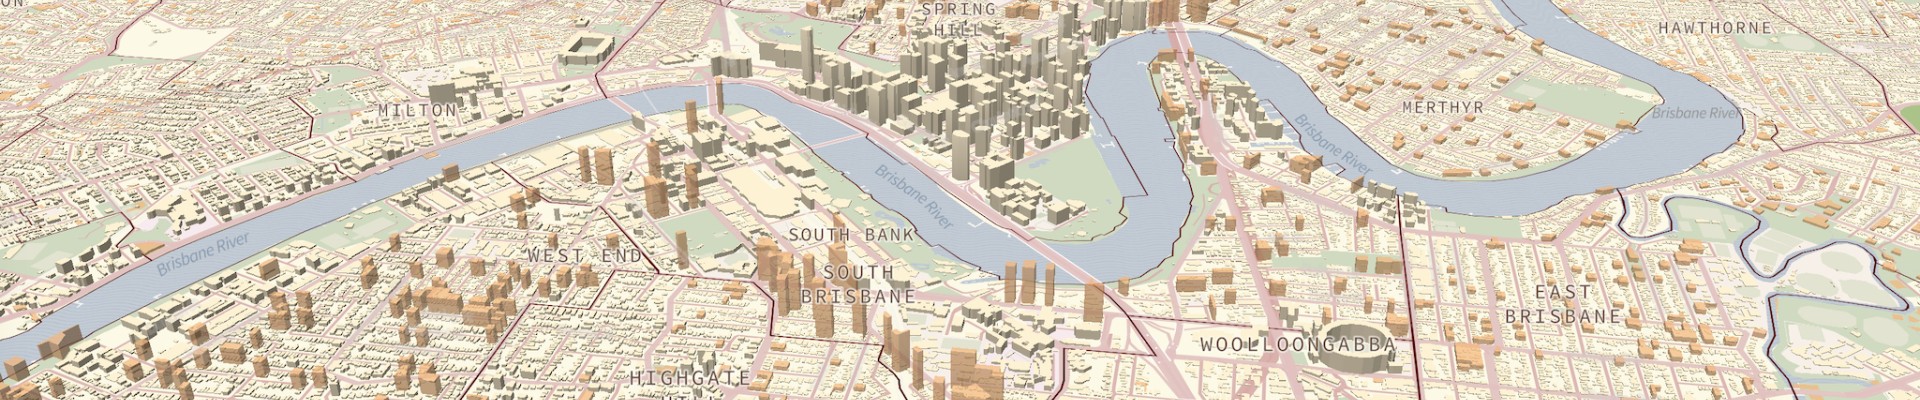 Compute generated map of Brisbane including Brisbane River from Mapping Future Brisbane interactive tool